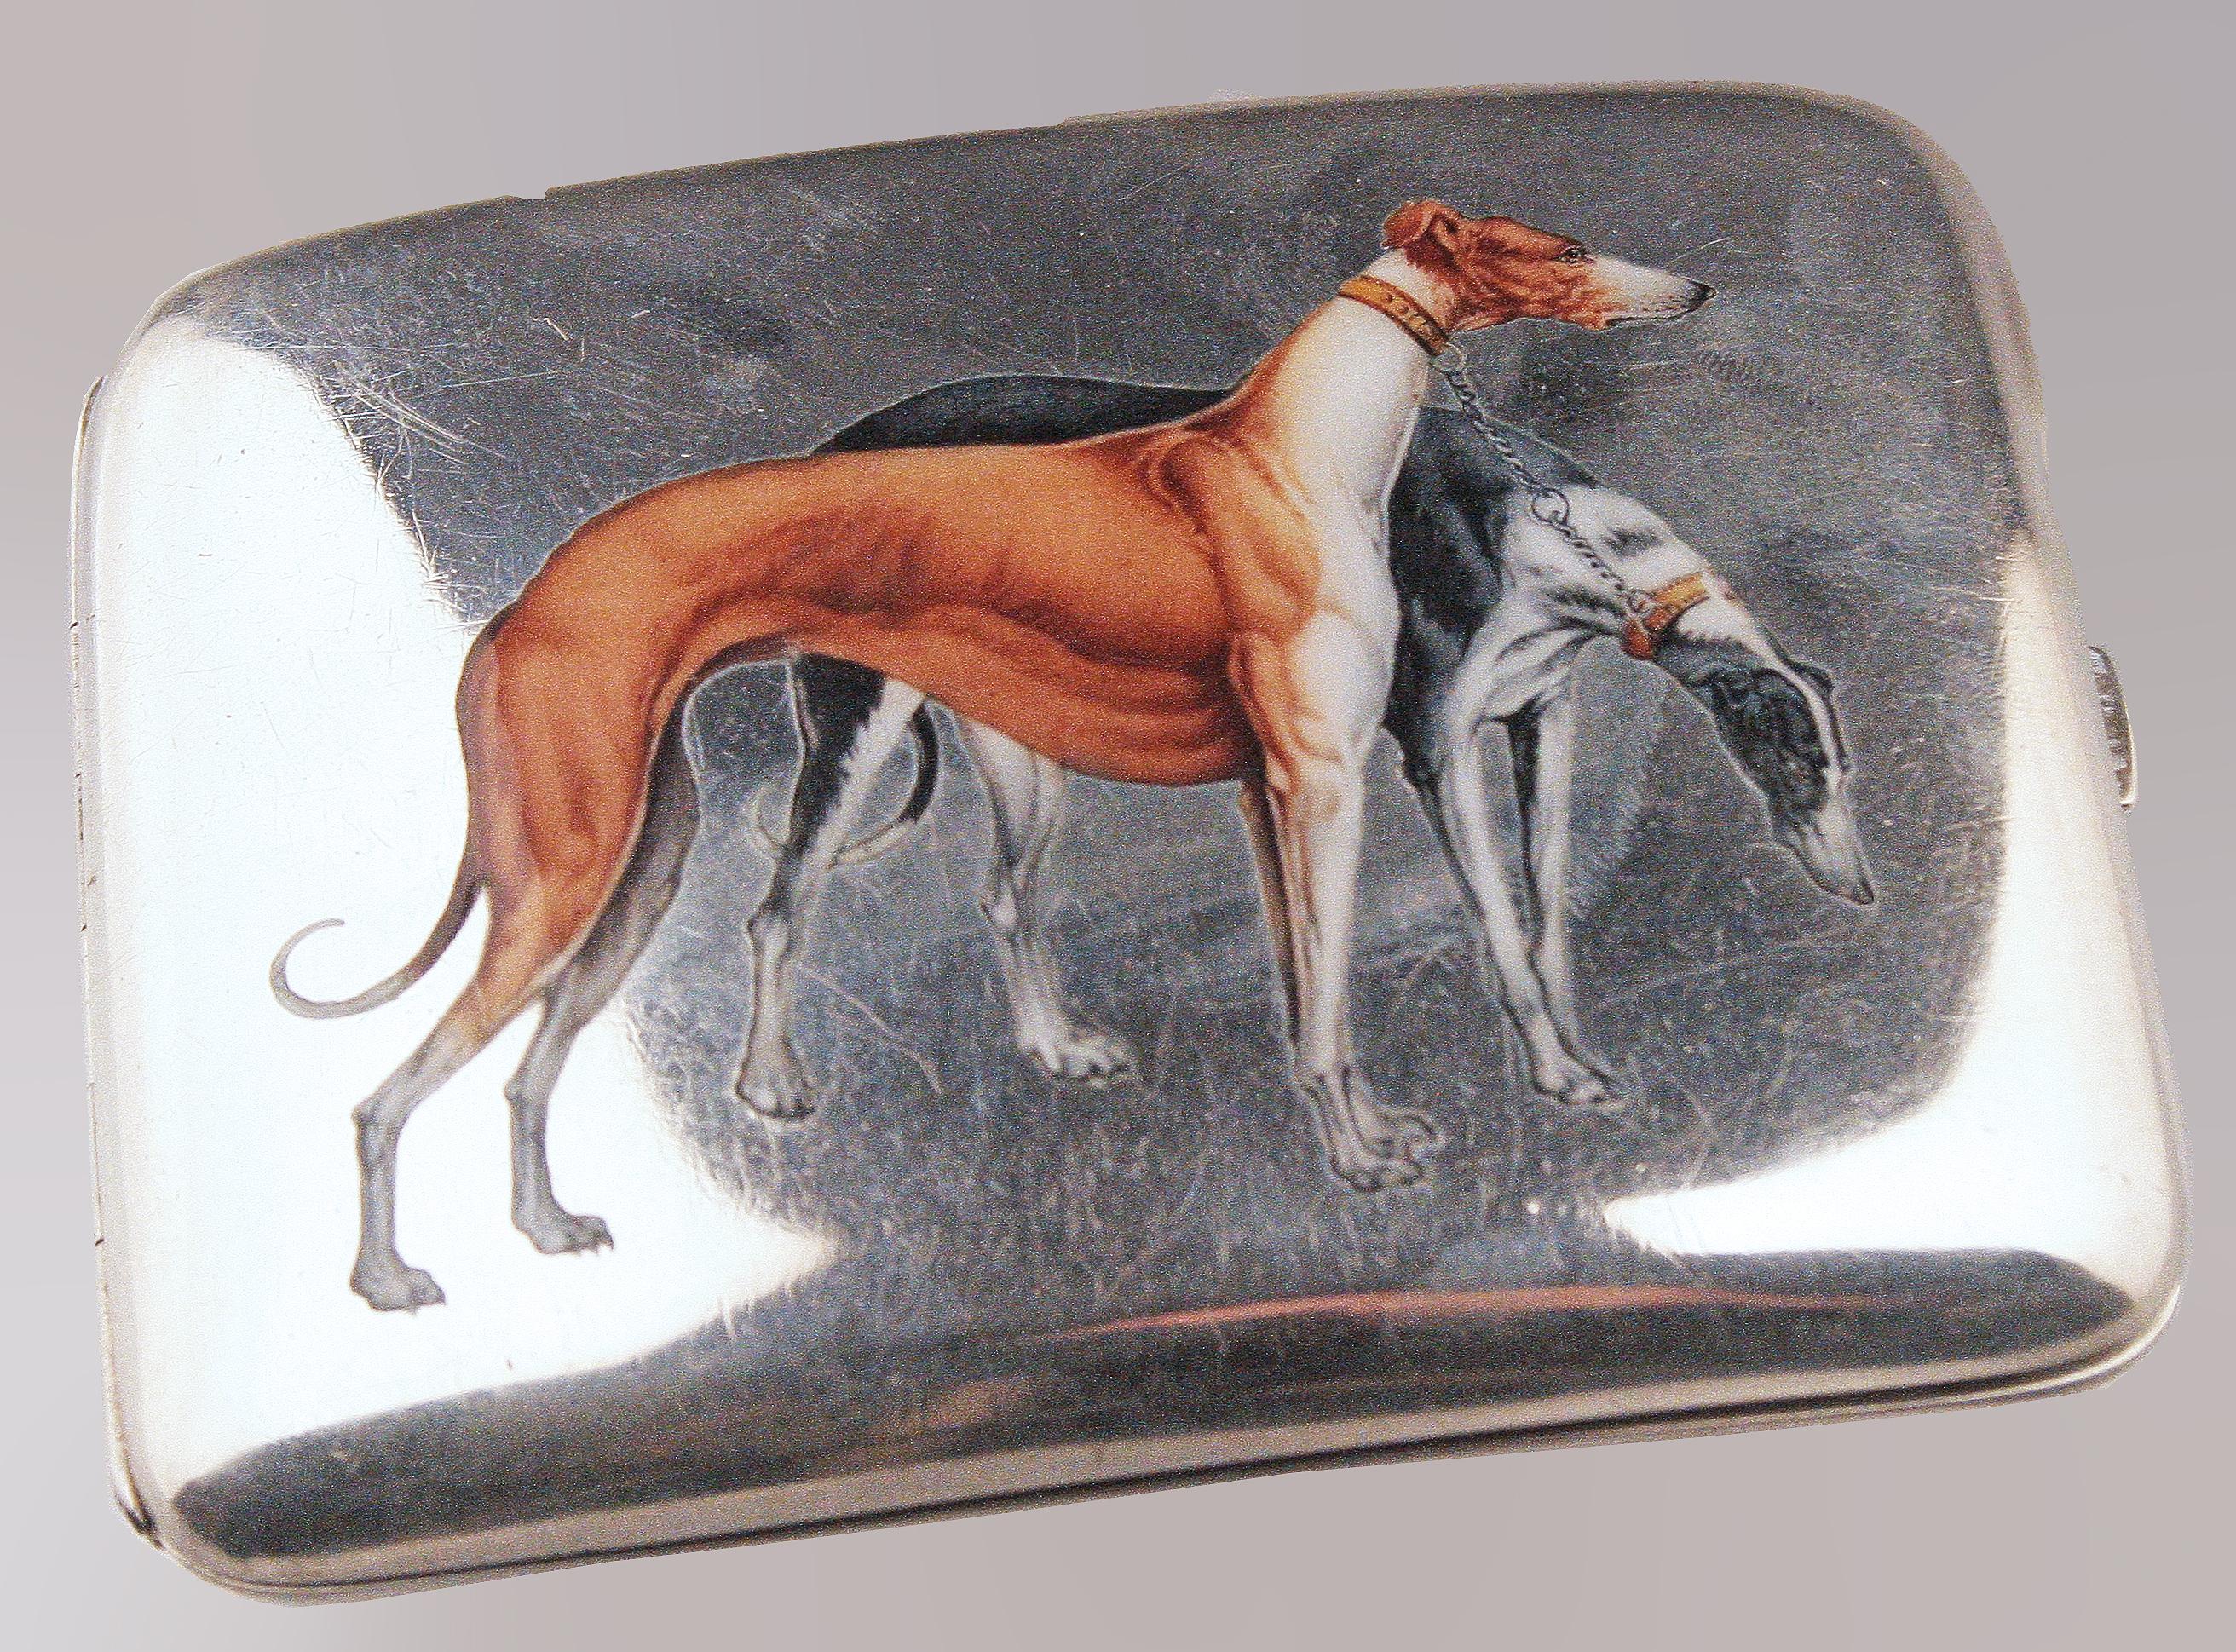 Silver and enamel ciagarette box
Enameled cigarette case with figure of greyhound dogs
Silver punch 800
Circa early 20th century Origin Italy
Excellent condition
has some wear from use
small stripes on the back cover
The greyhound (from the Latin